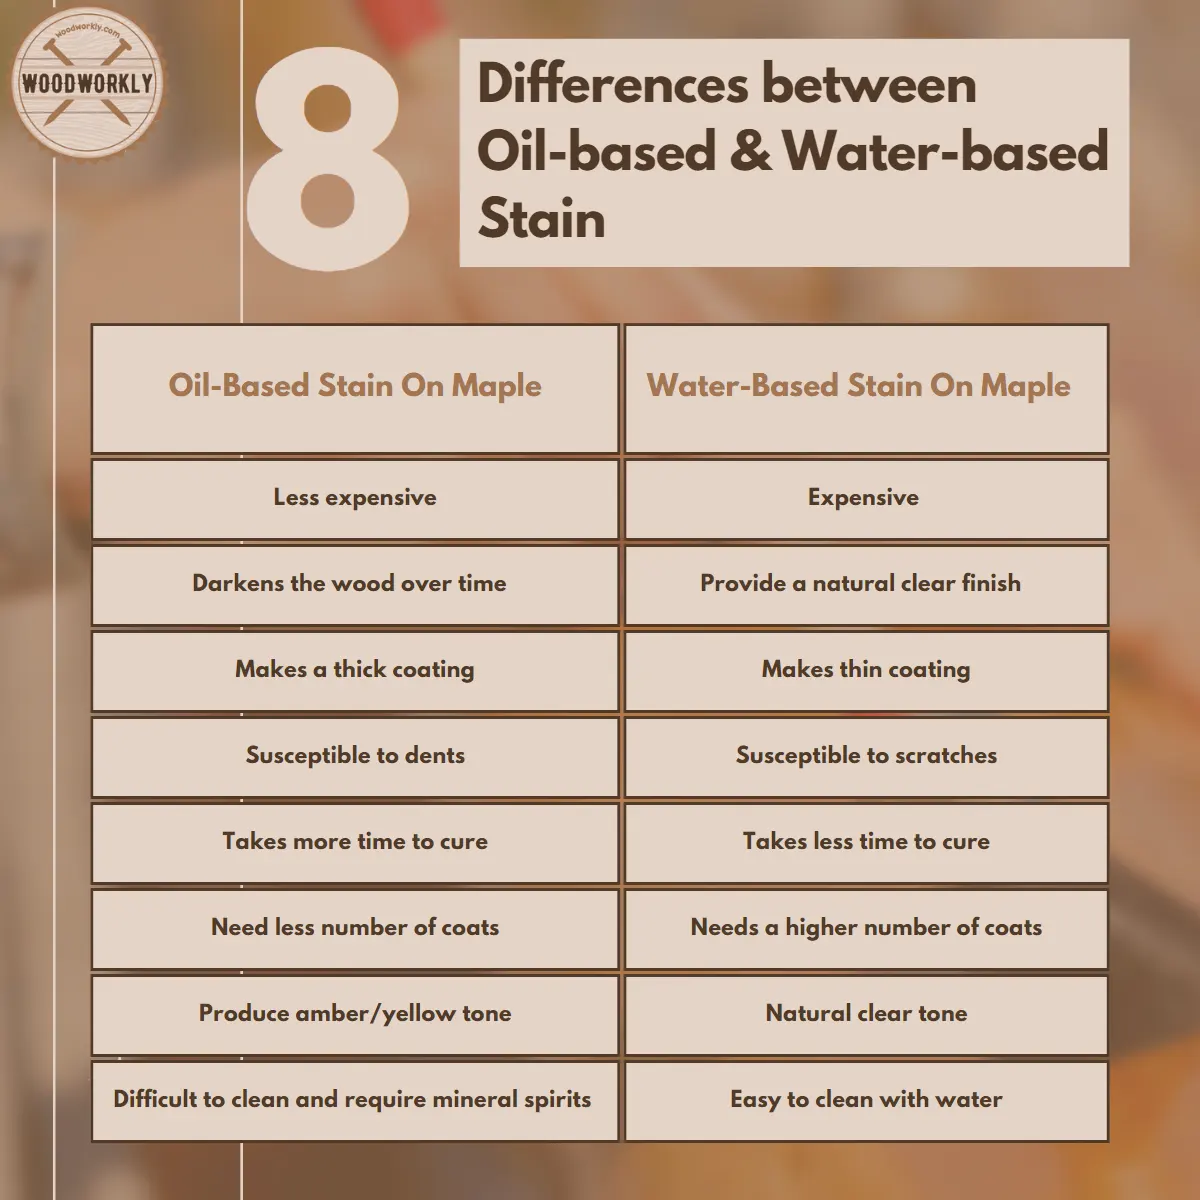 Differences between Oil-based & Water-based Stain